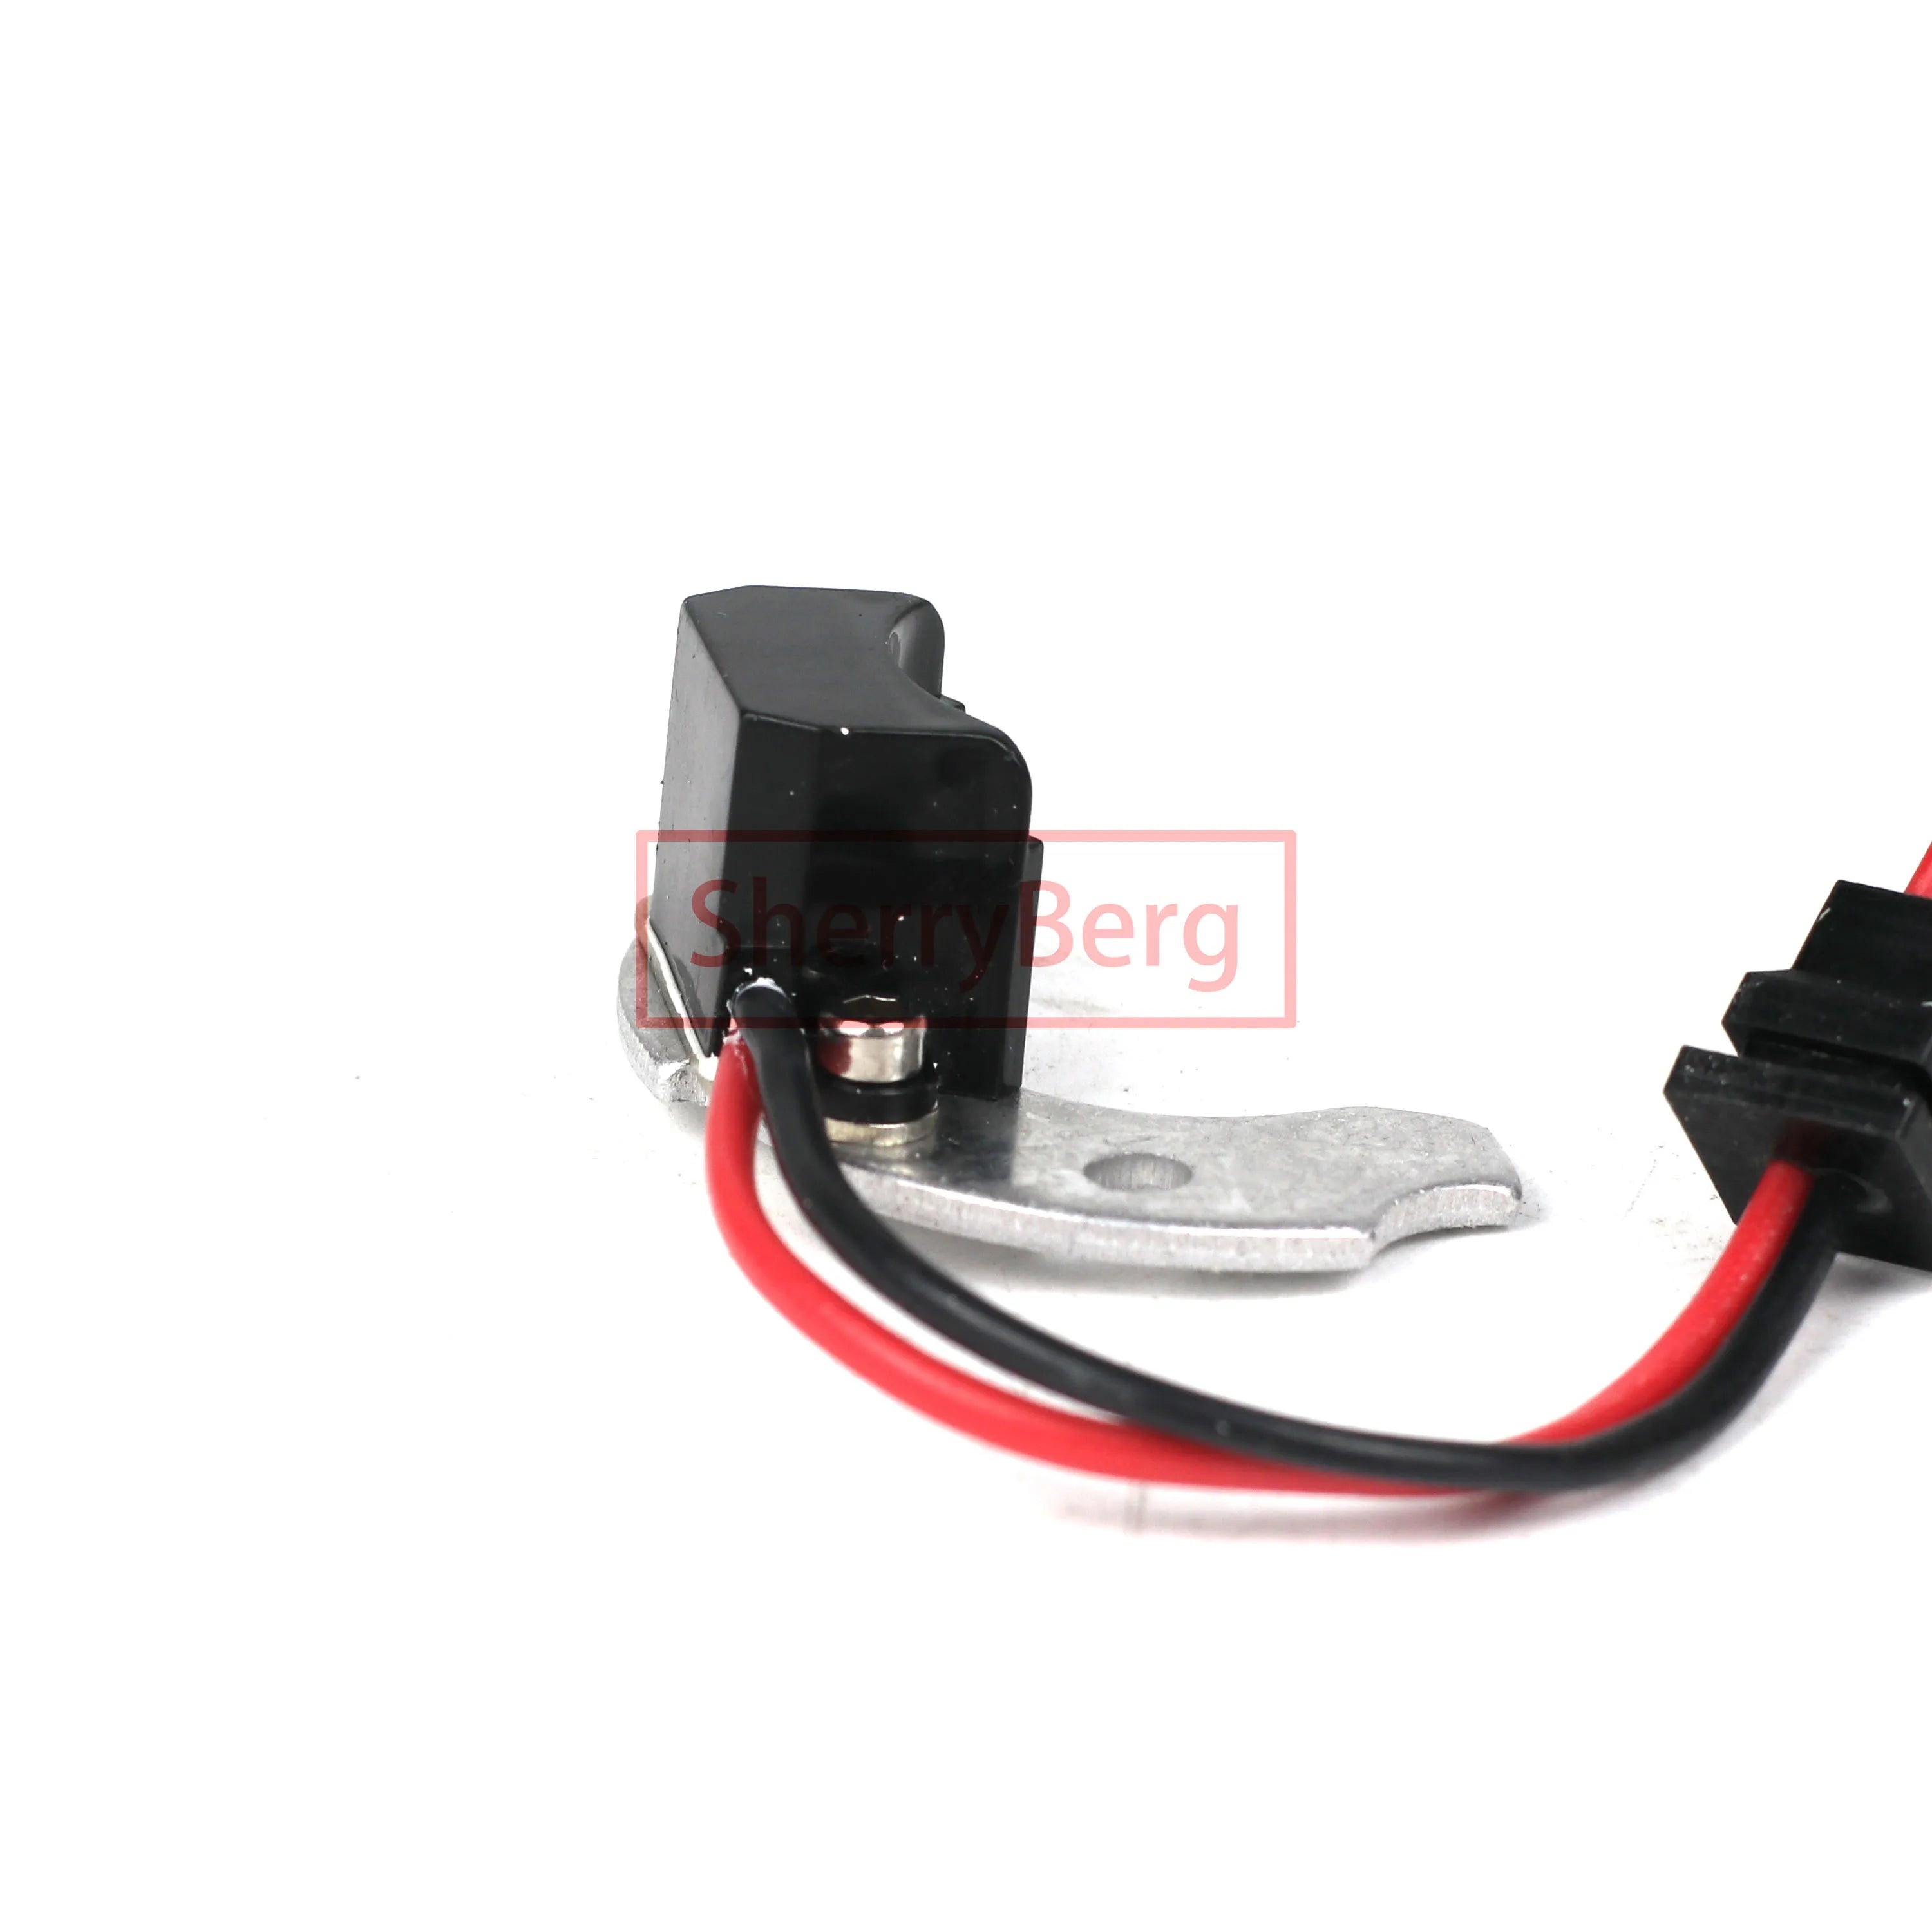 SherryBerg Distributor Electronic IGNITION SET Electrical Ignition Kit for Bosch 009, 050 Distributors 3BOS4U1 FOR VW Bug...New